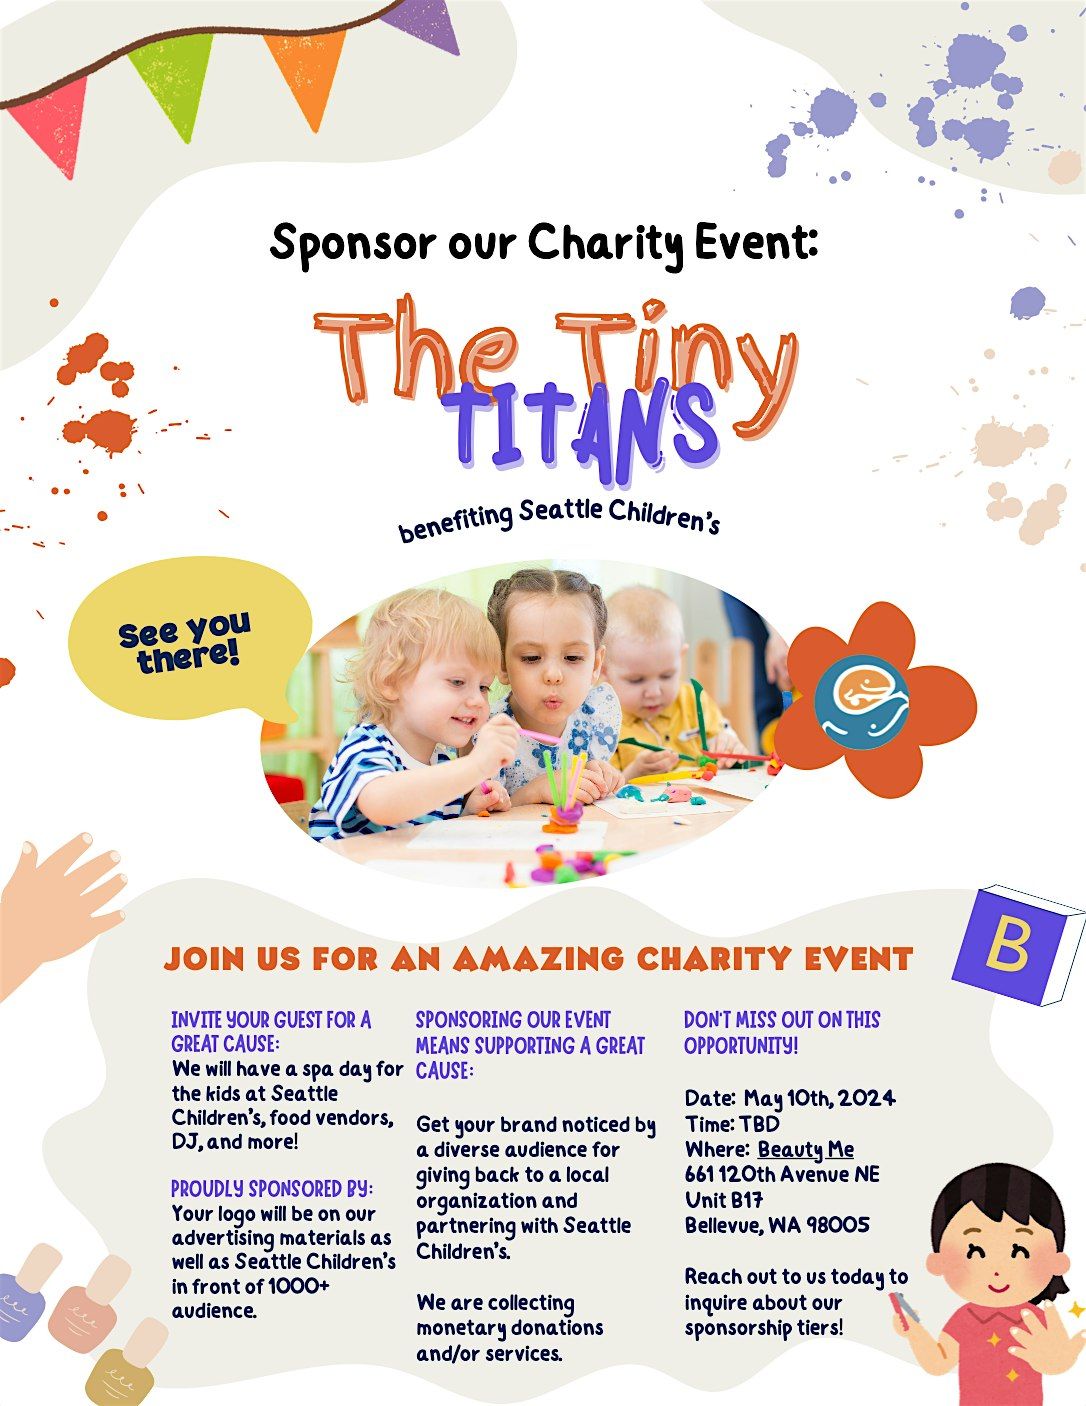 Seattle Children's Charity Campaign